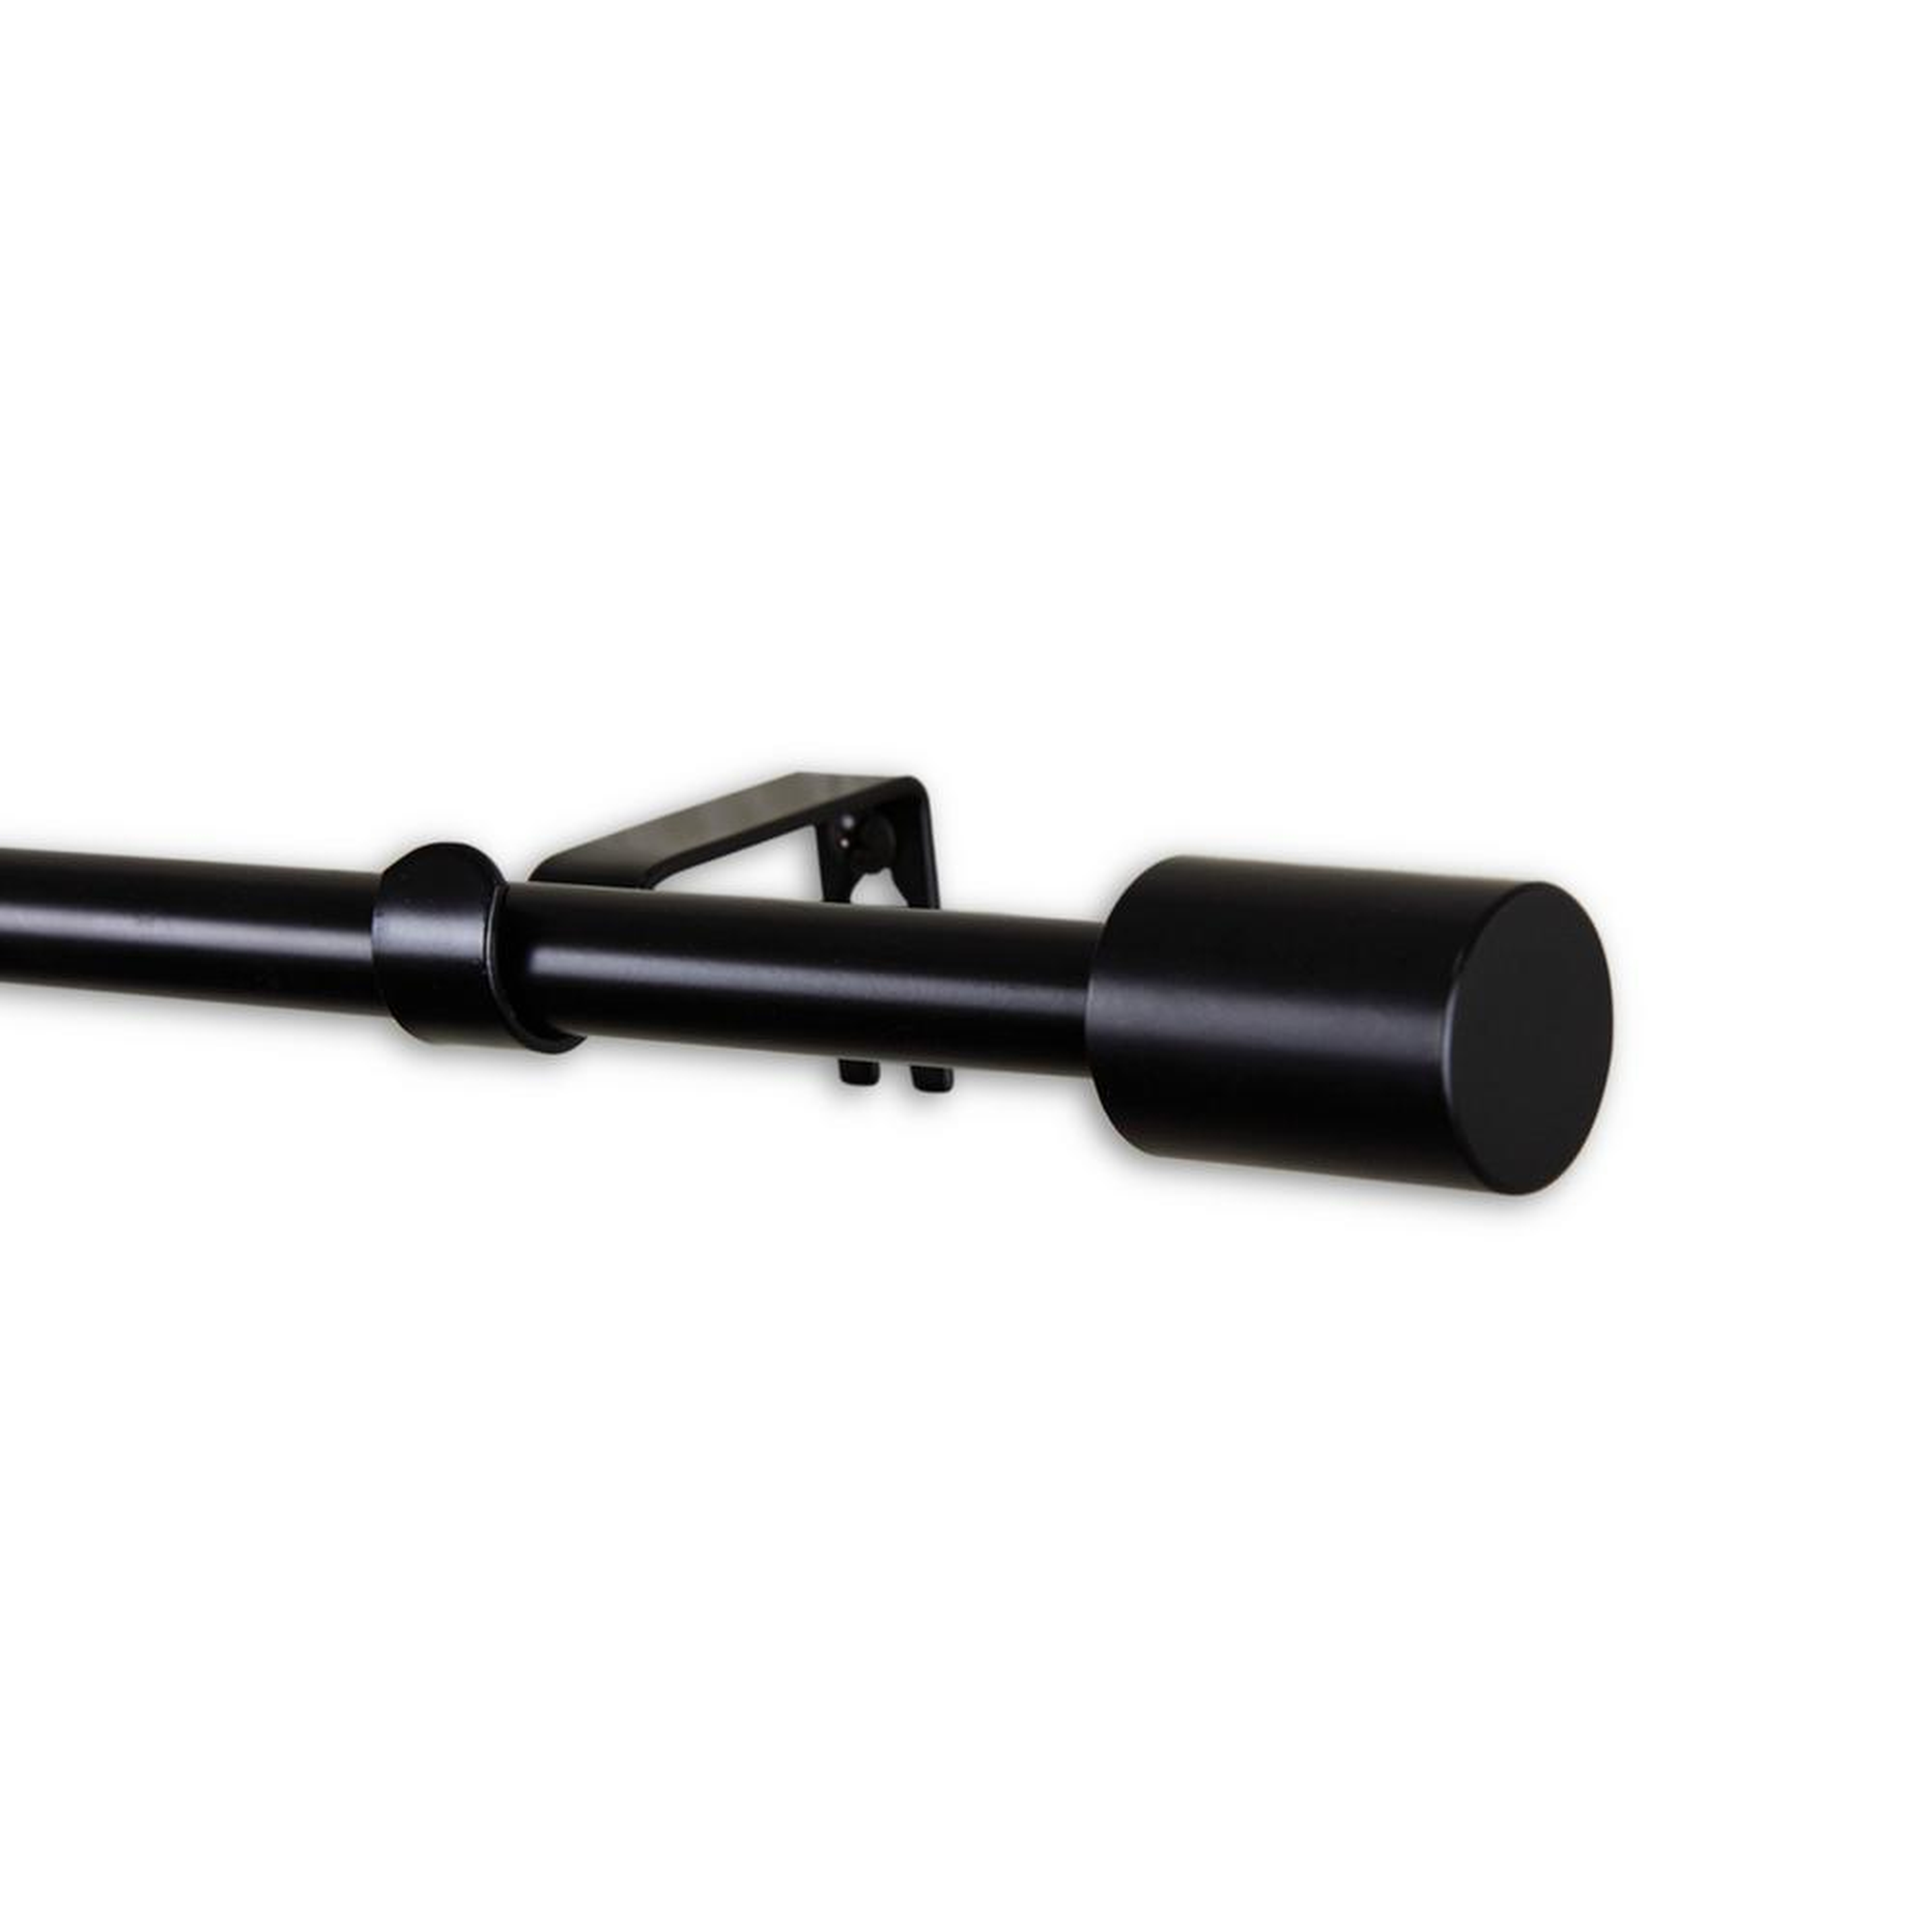 Rod Desyne Nora 5/8 in. Curtain Rod 84-120 in. - Black - Home Depot